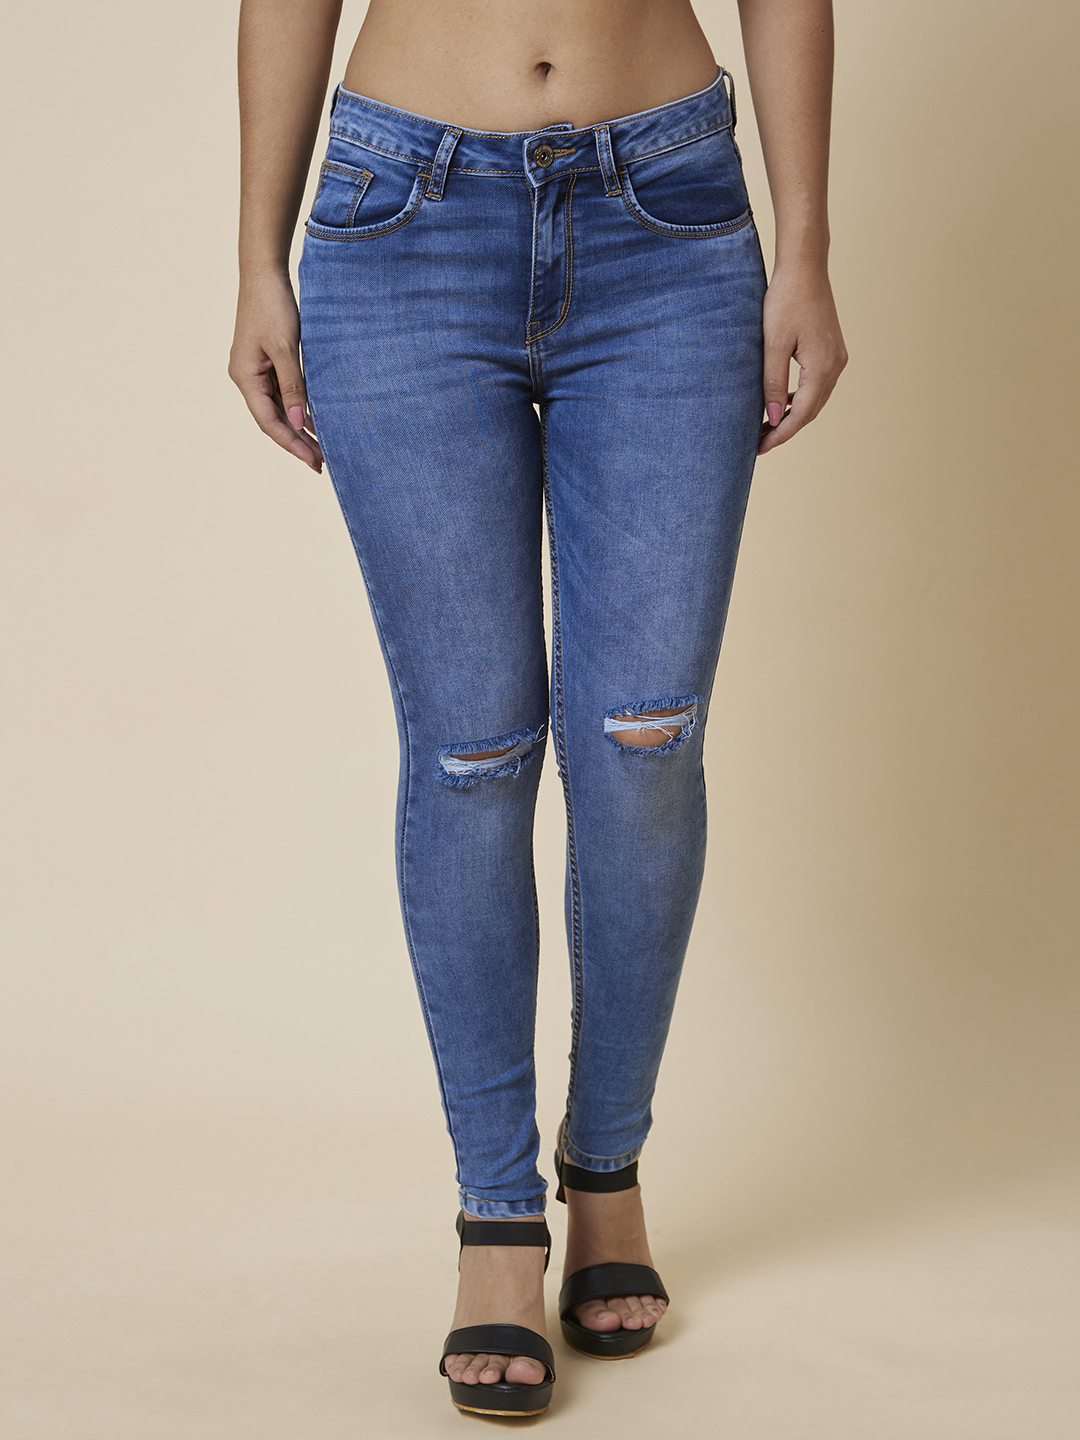 Glozeplus Bell Bottom Jeans for Women High Waisted Skinny India